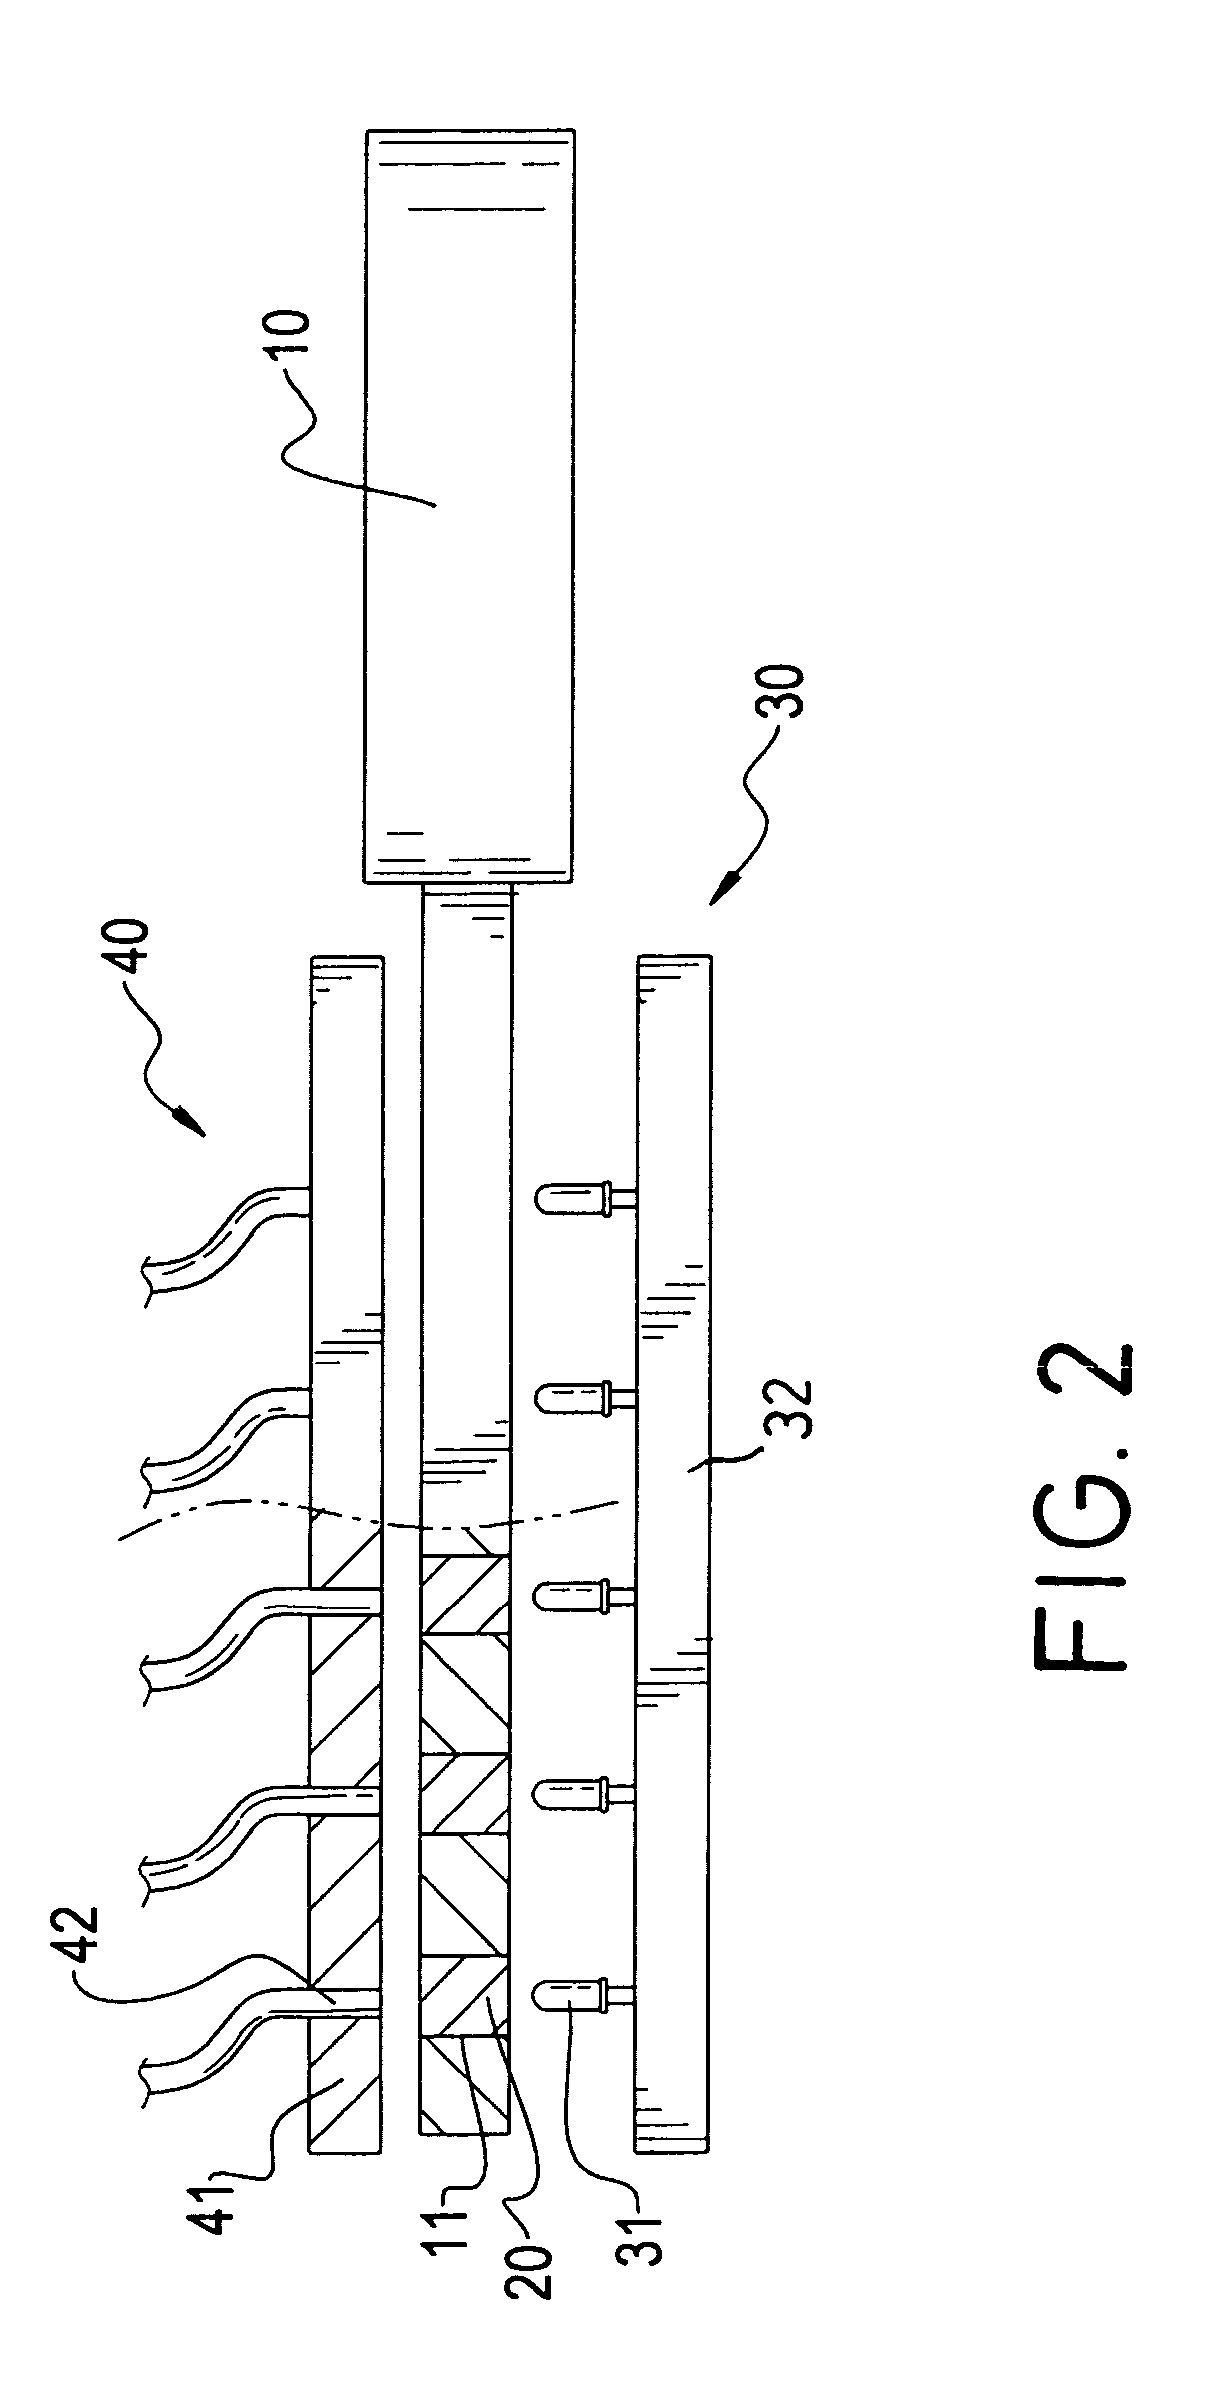 Unlocking method by identification of colored light rays and unlocking apparatus using this method